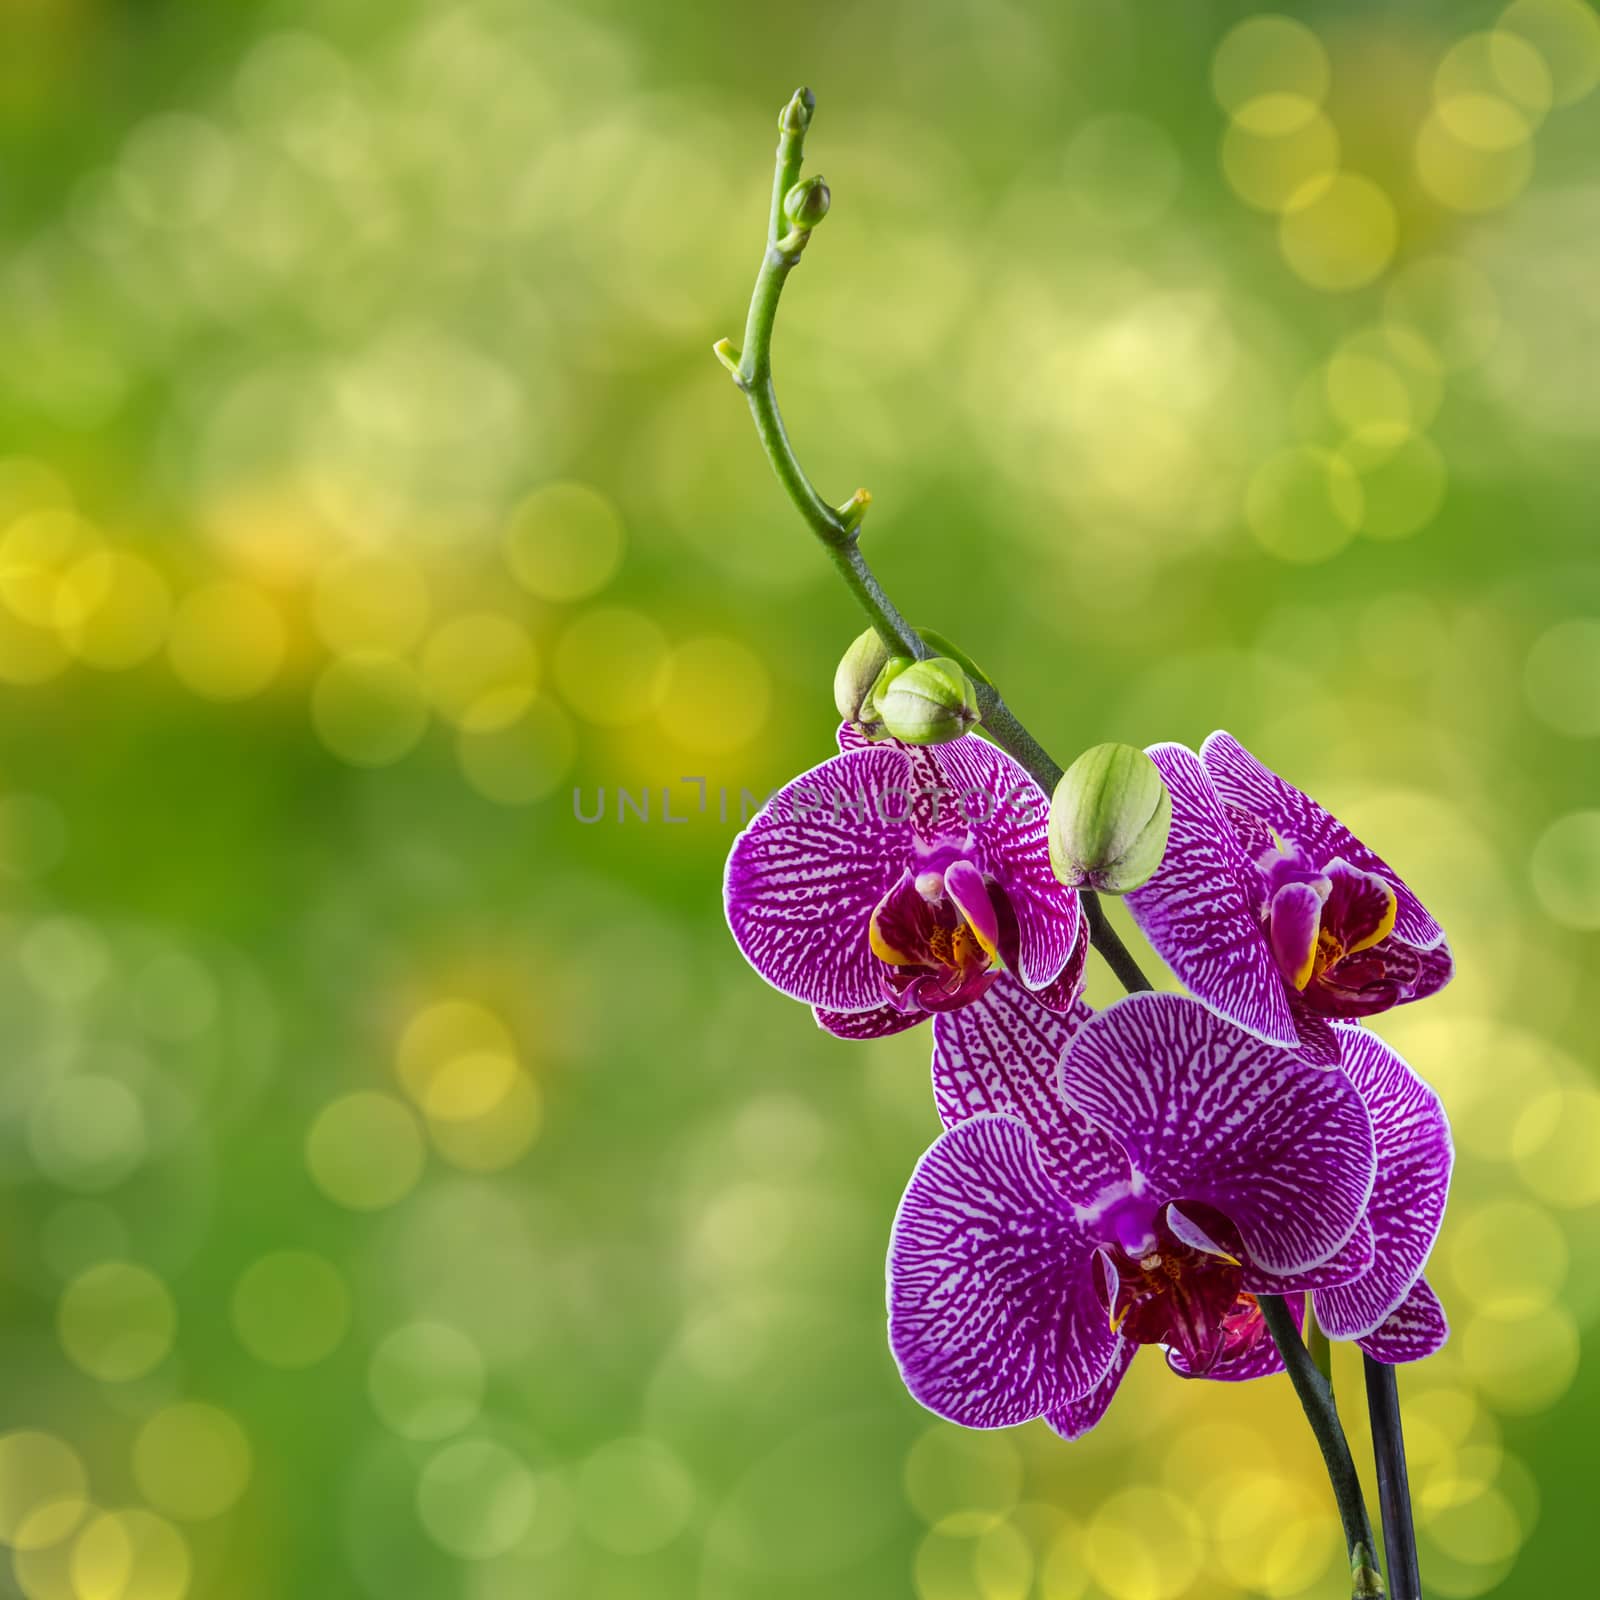 purple orchid flower with white stripes close up on blur green background